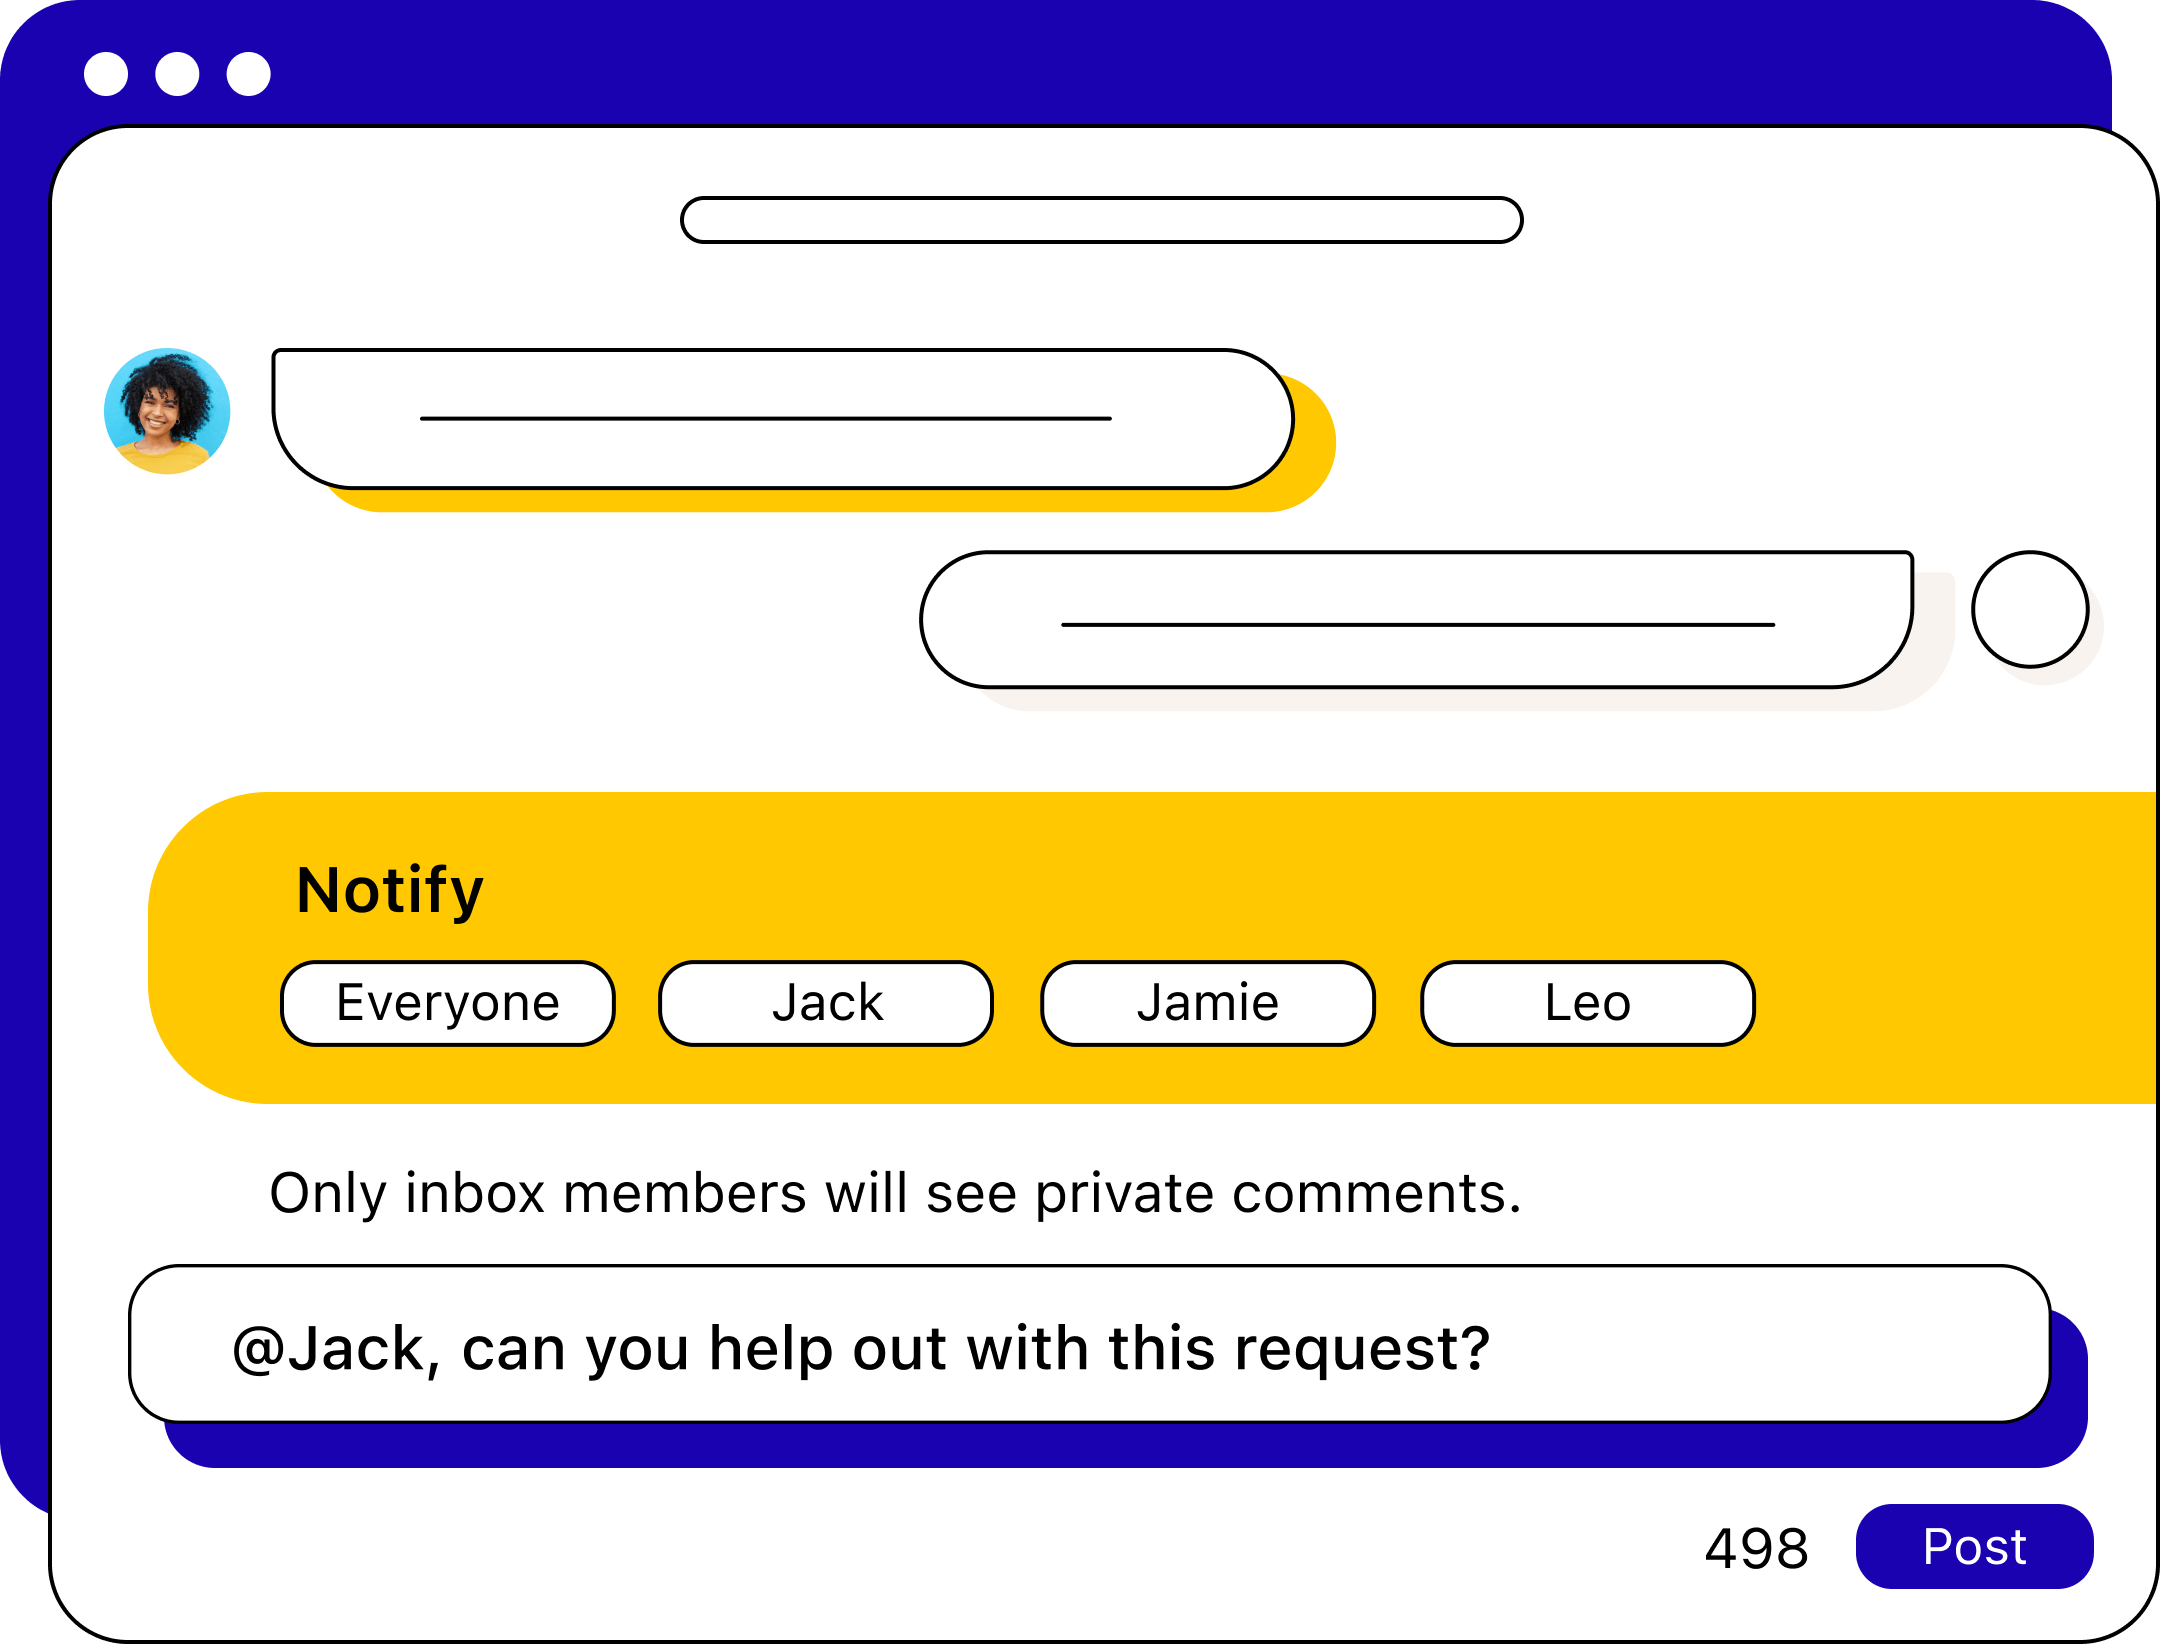 A chat screen with a yellow private comments section at the bottom populated with the message “@Jack, can you help out with this request?